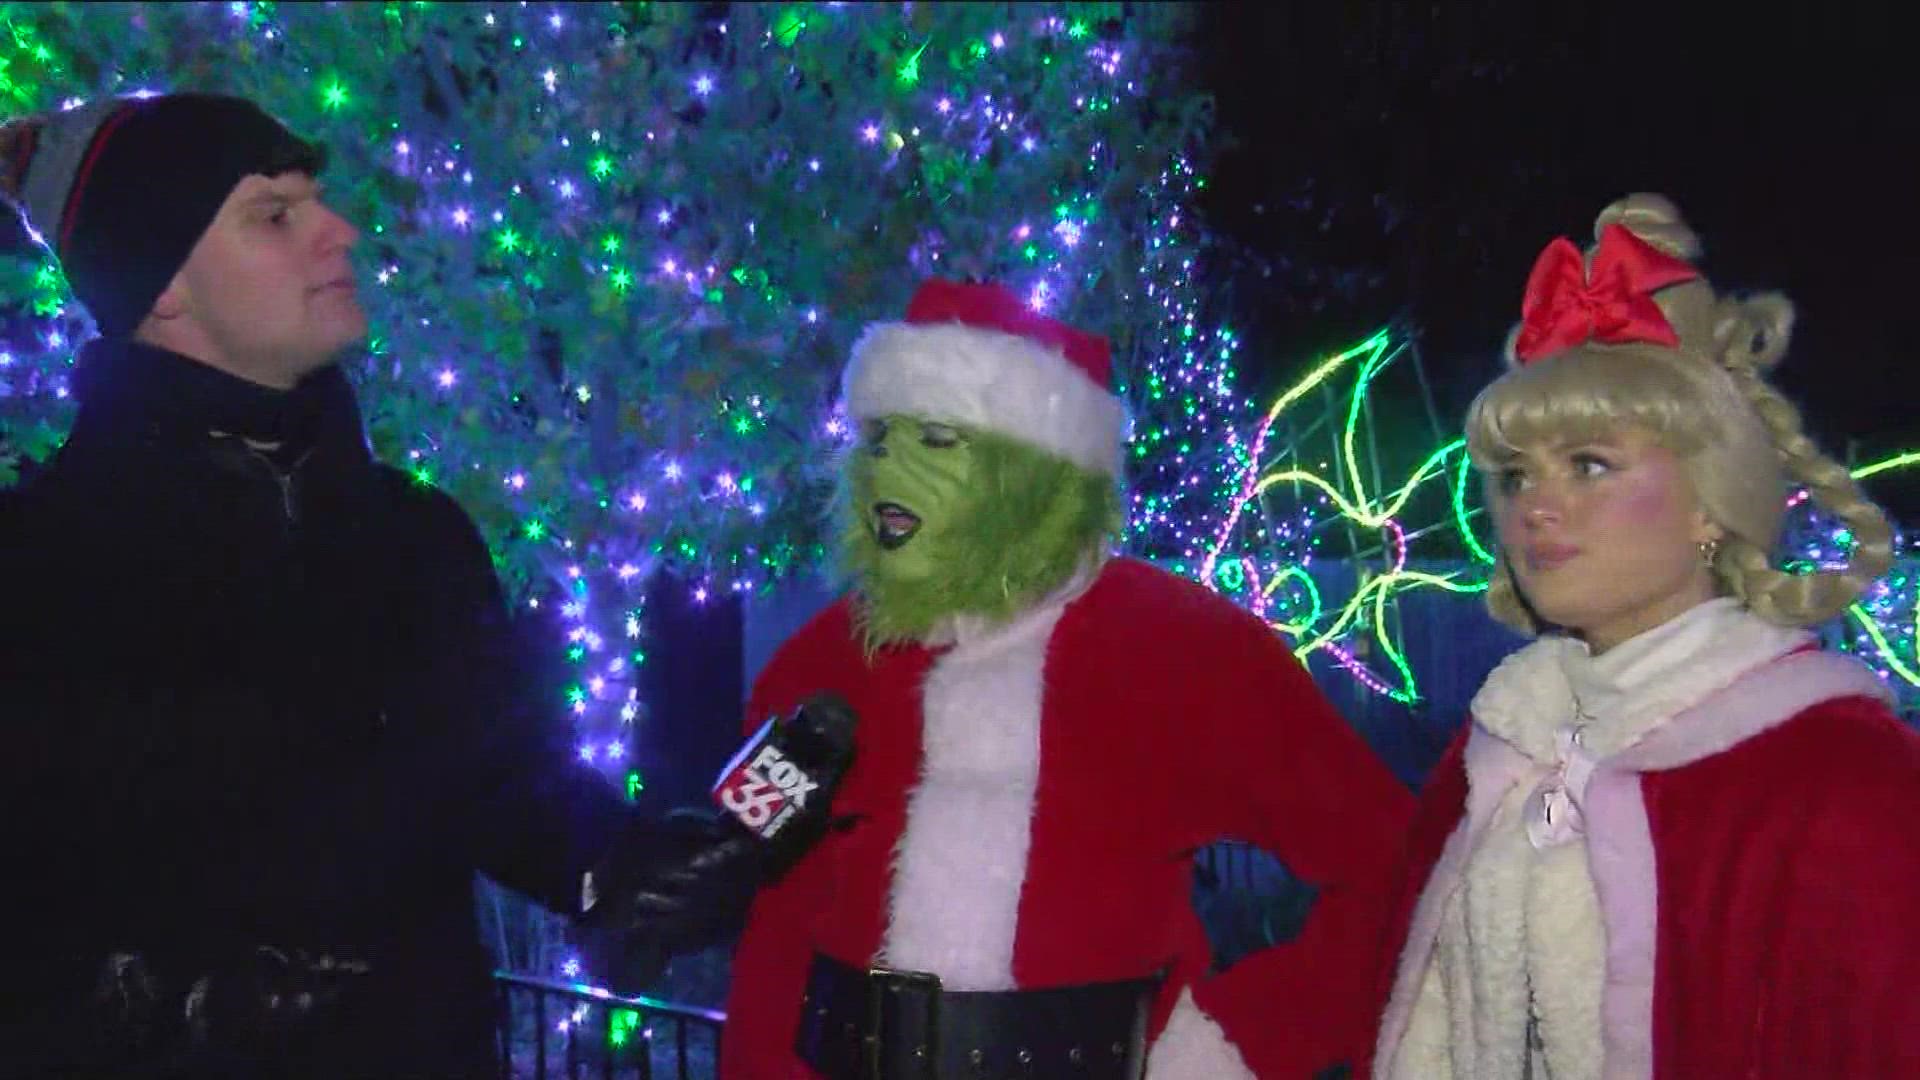 The Grinch and Cindy Lou Who talk with Trent Croci at the Lights Before Christmas.